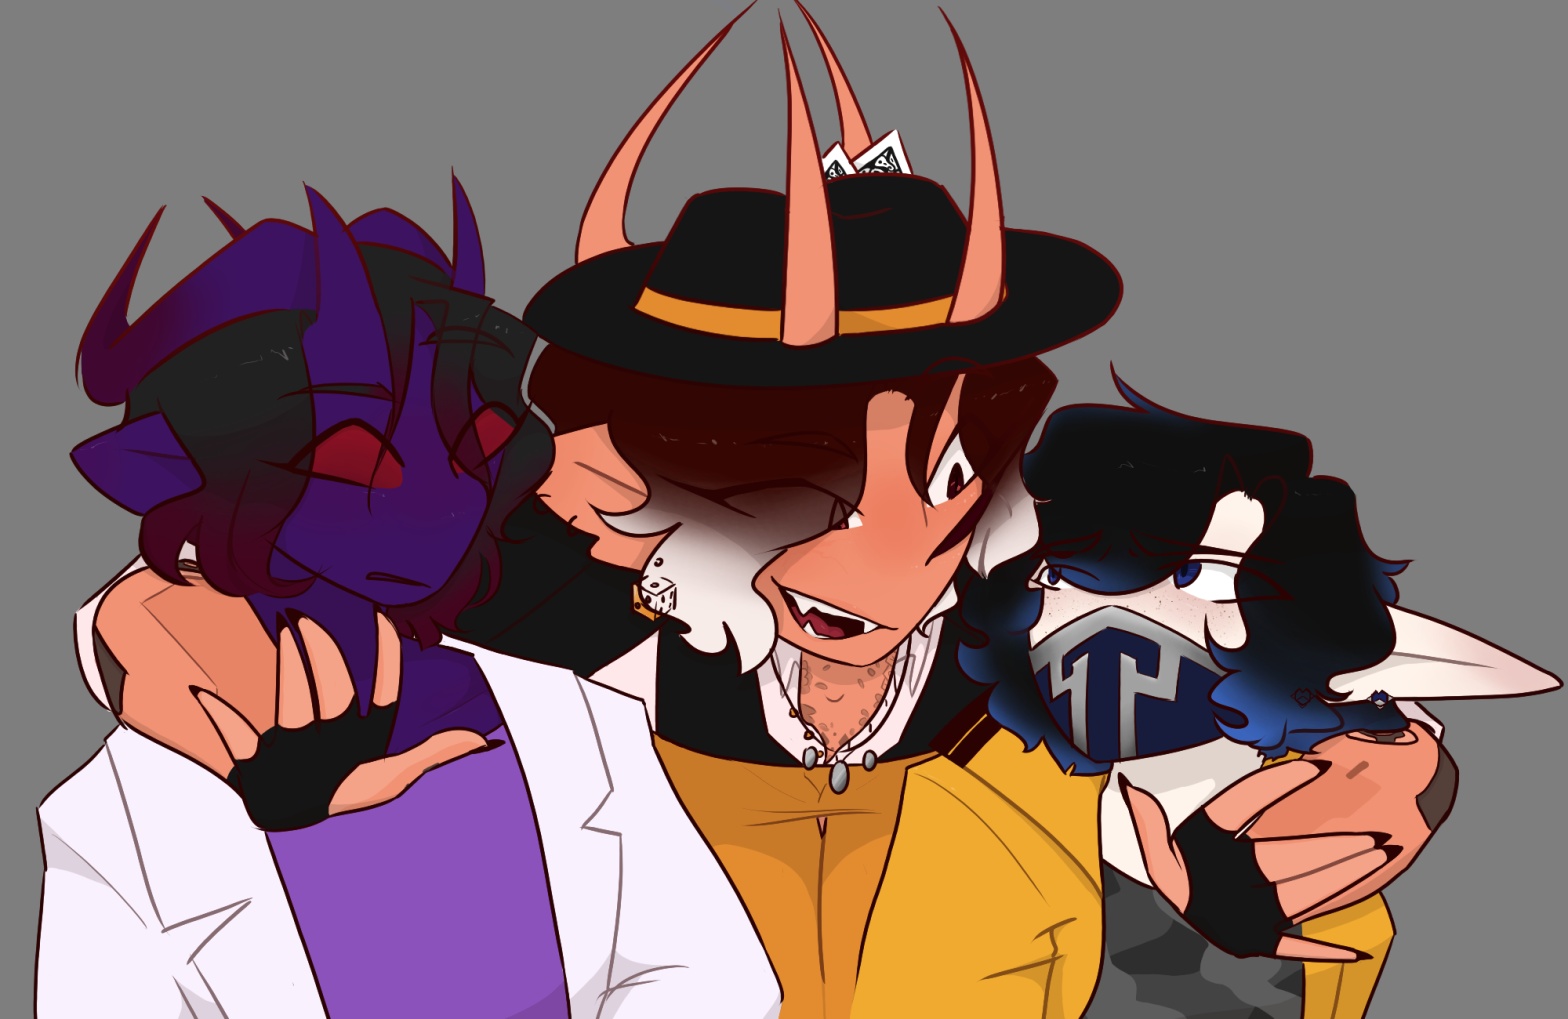 a purple tiefling in lab gear on the left, an orange tiefling with his arms around the other 2 in the middle and a pasty elf with black and blue hair wearing a mask